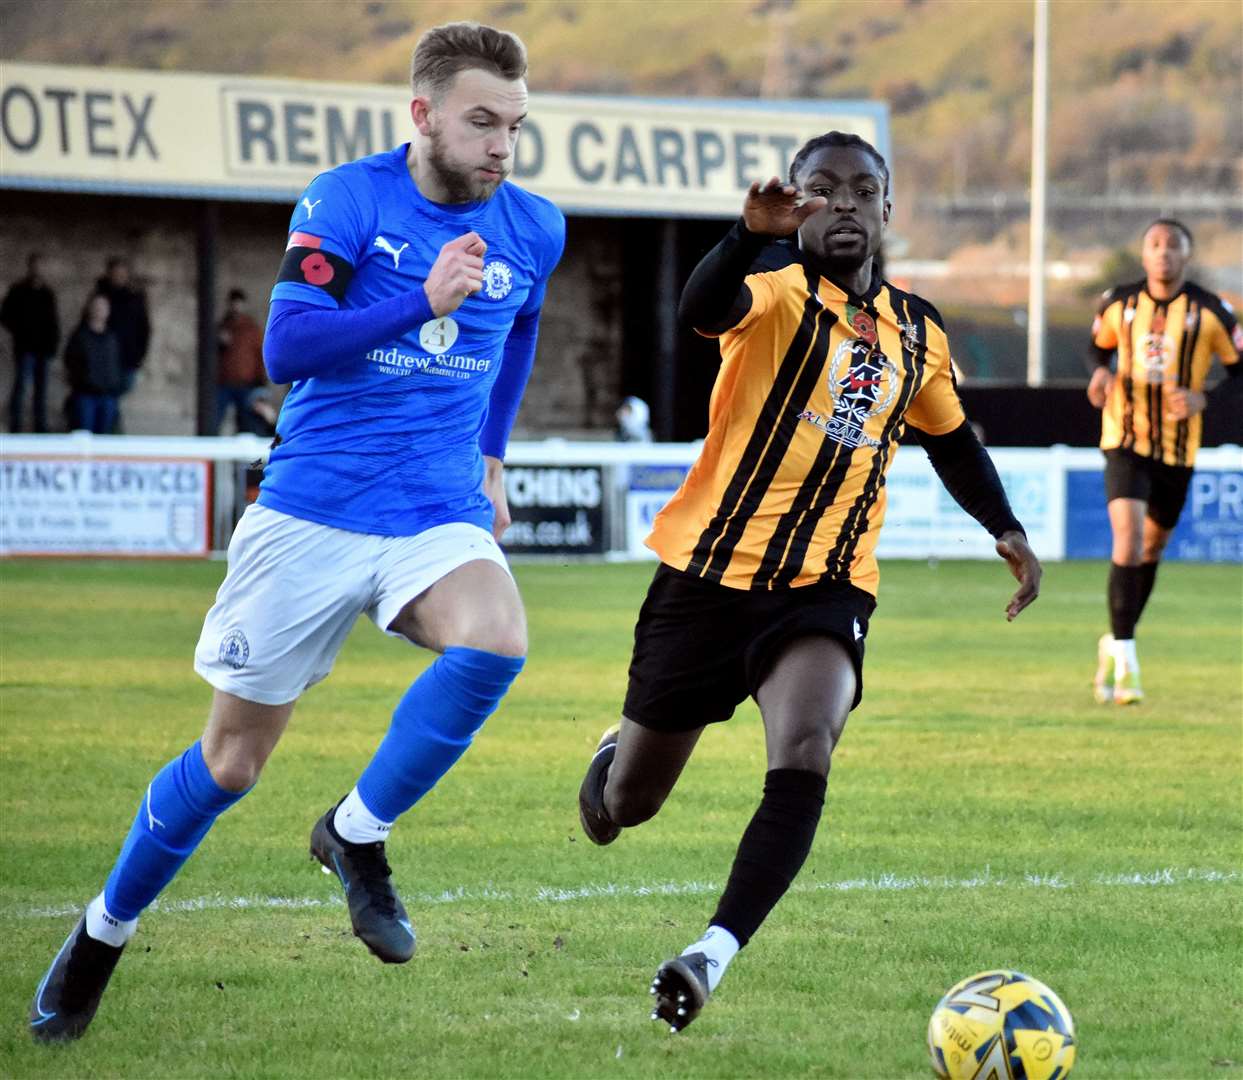 Match action between Folkestone and Billericay on Saturday Picture: Randolph File